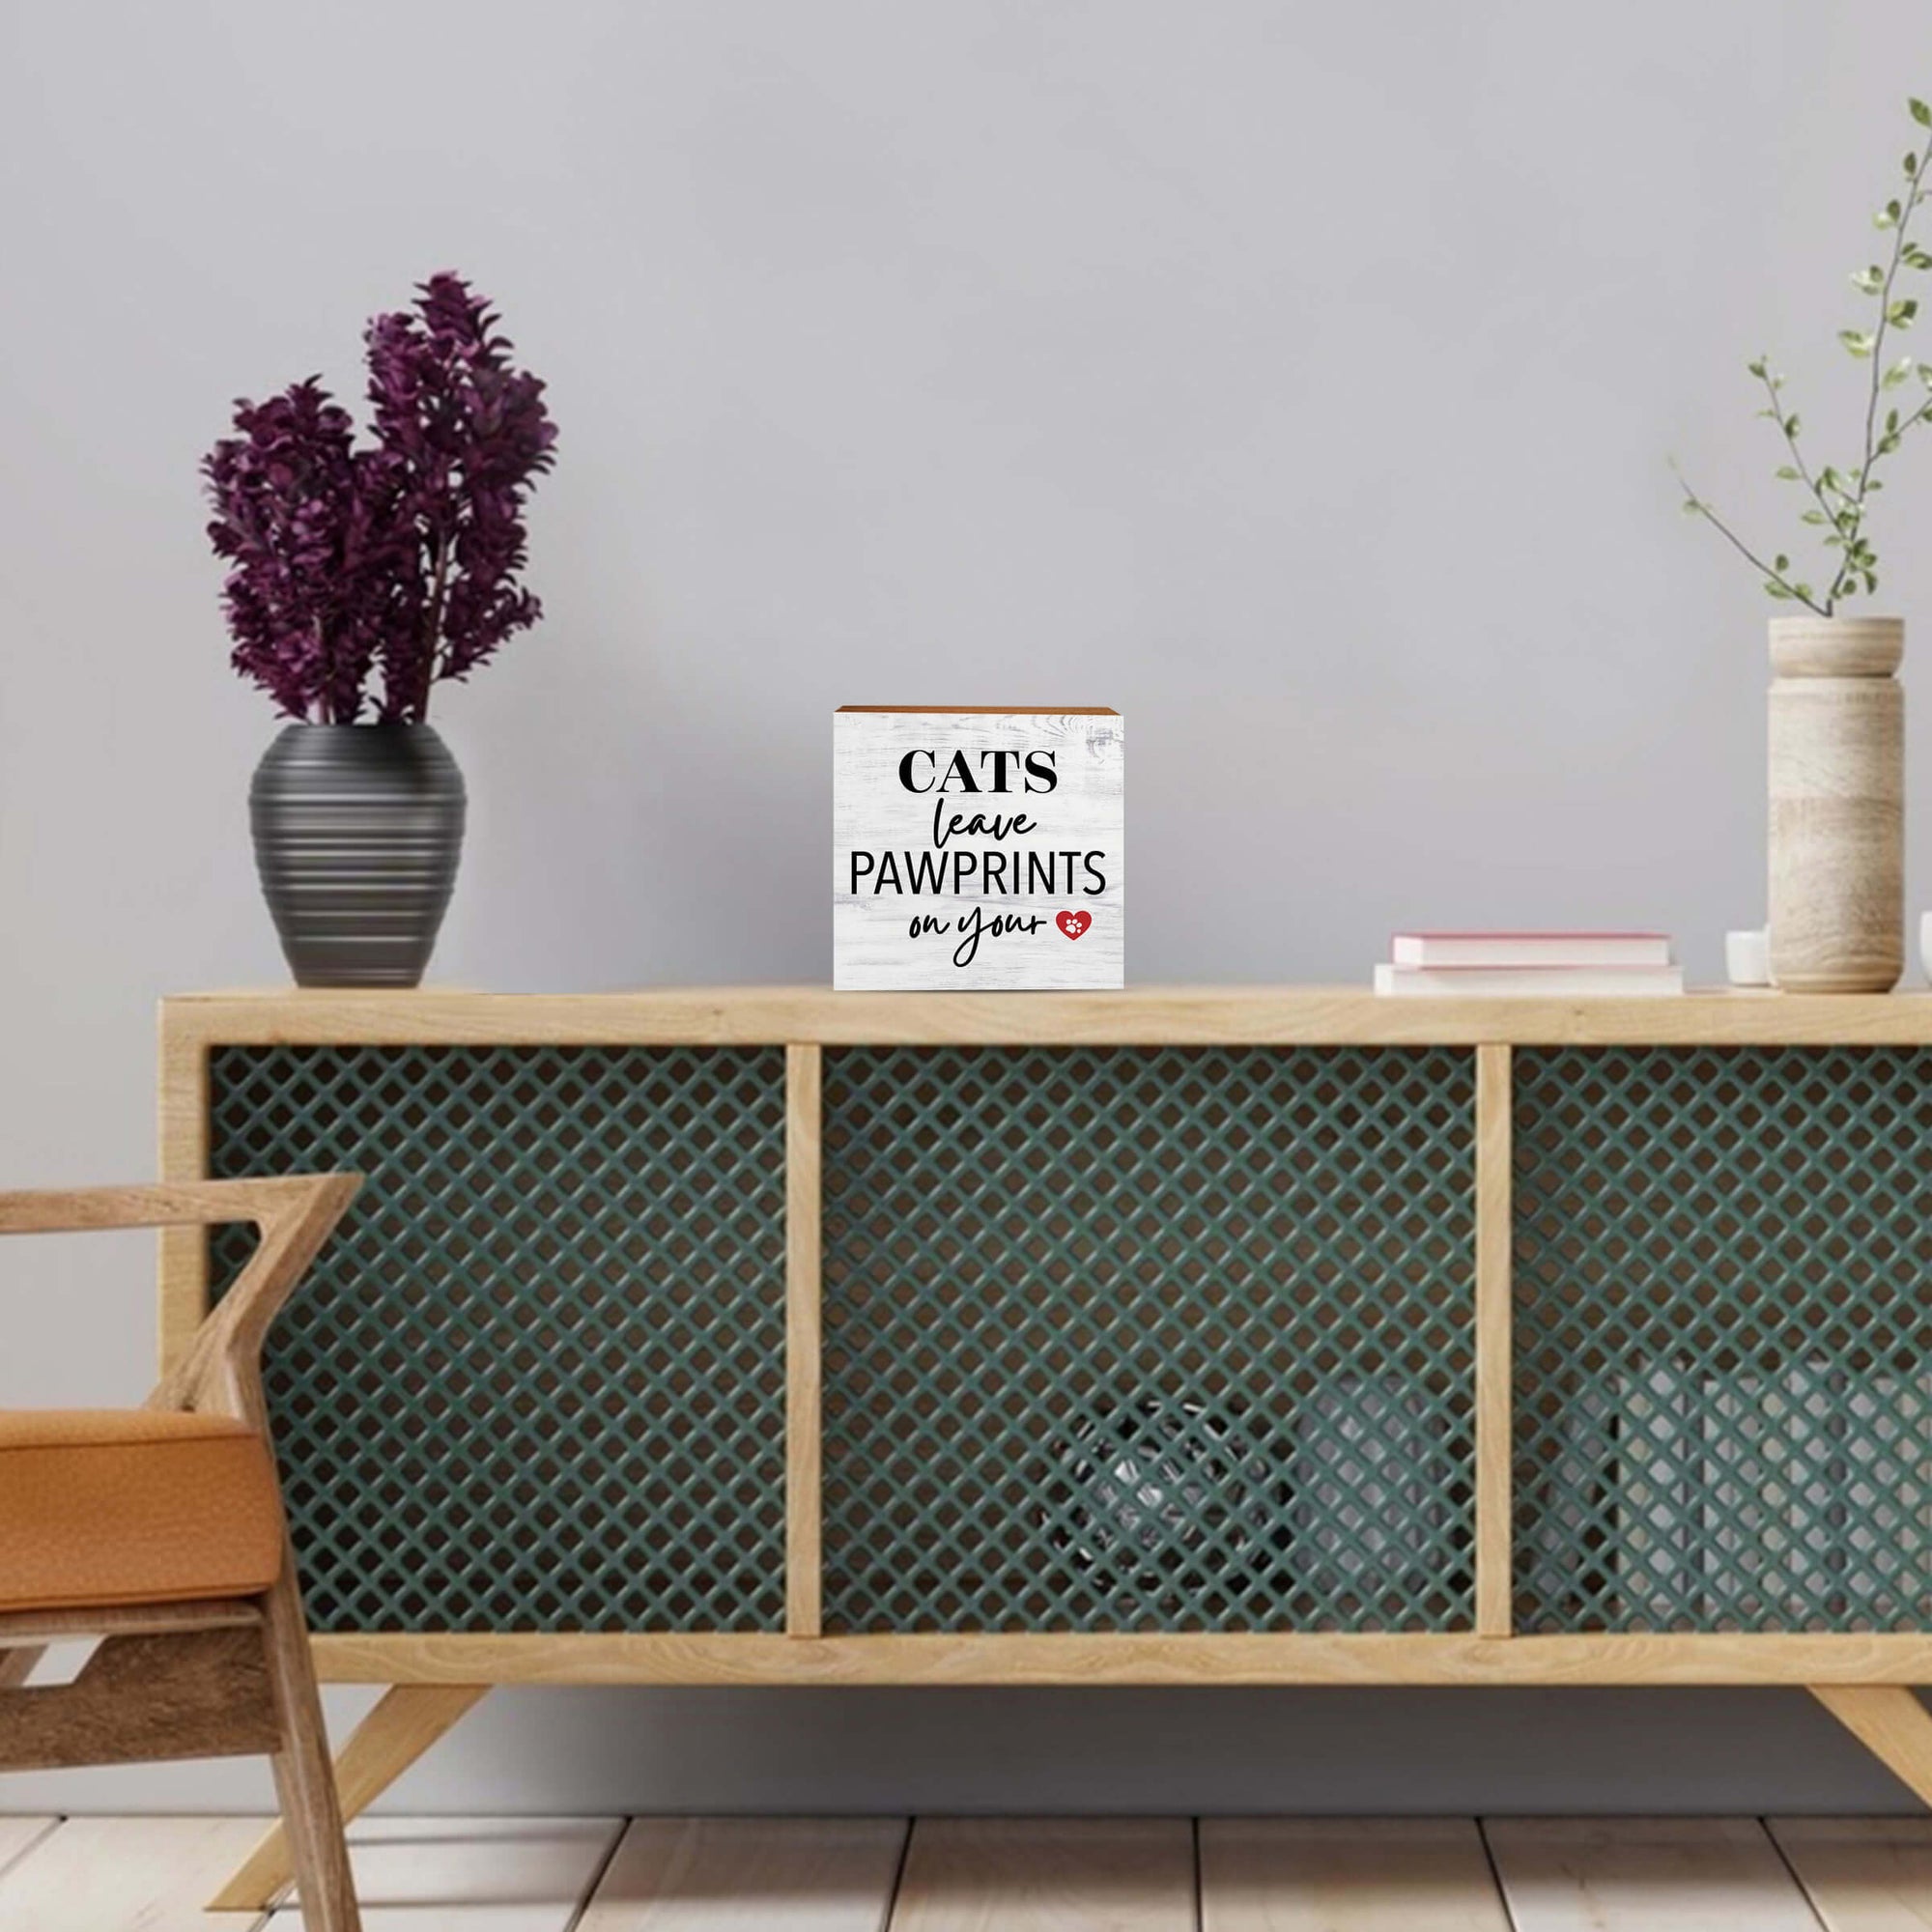 Wooden Shelf Decor and Tabletop Signs with Pet Verses - Cats Leave Pawprints